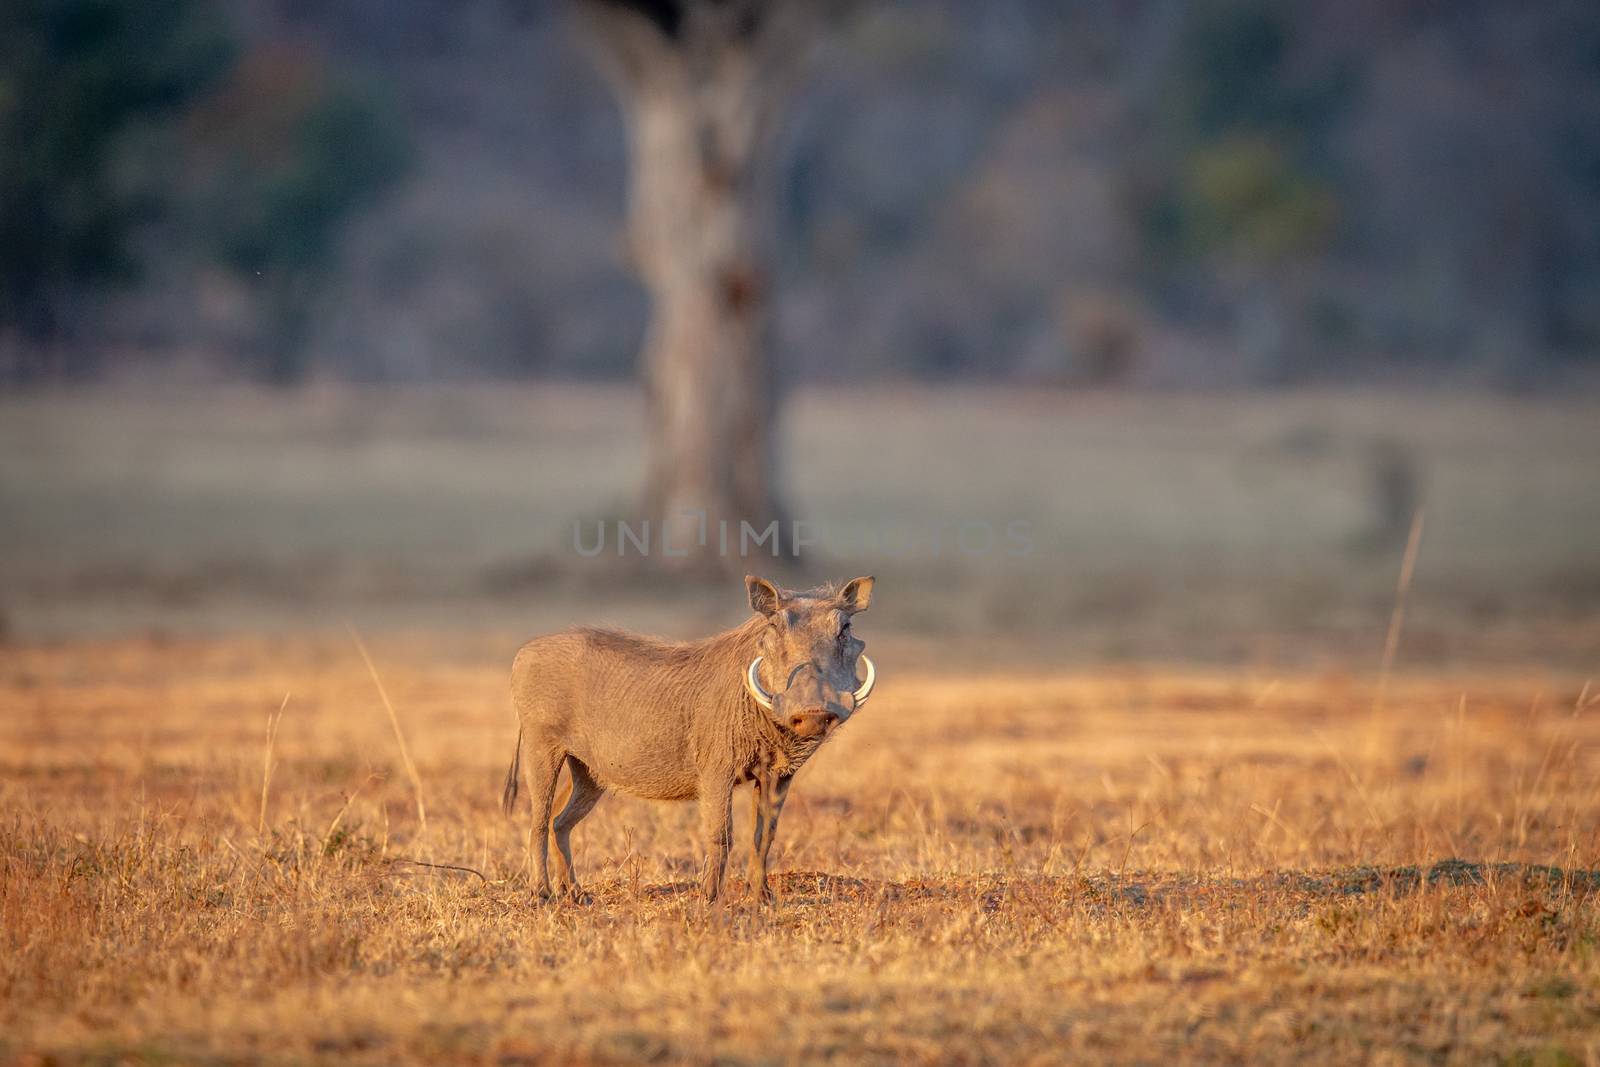 Warthog standing in the grass. by Simoneemanphotography